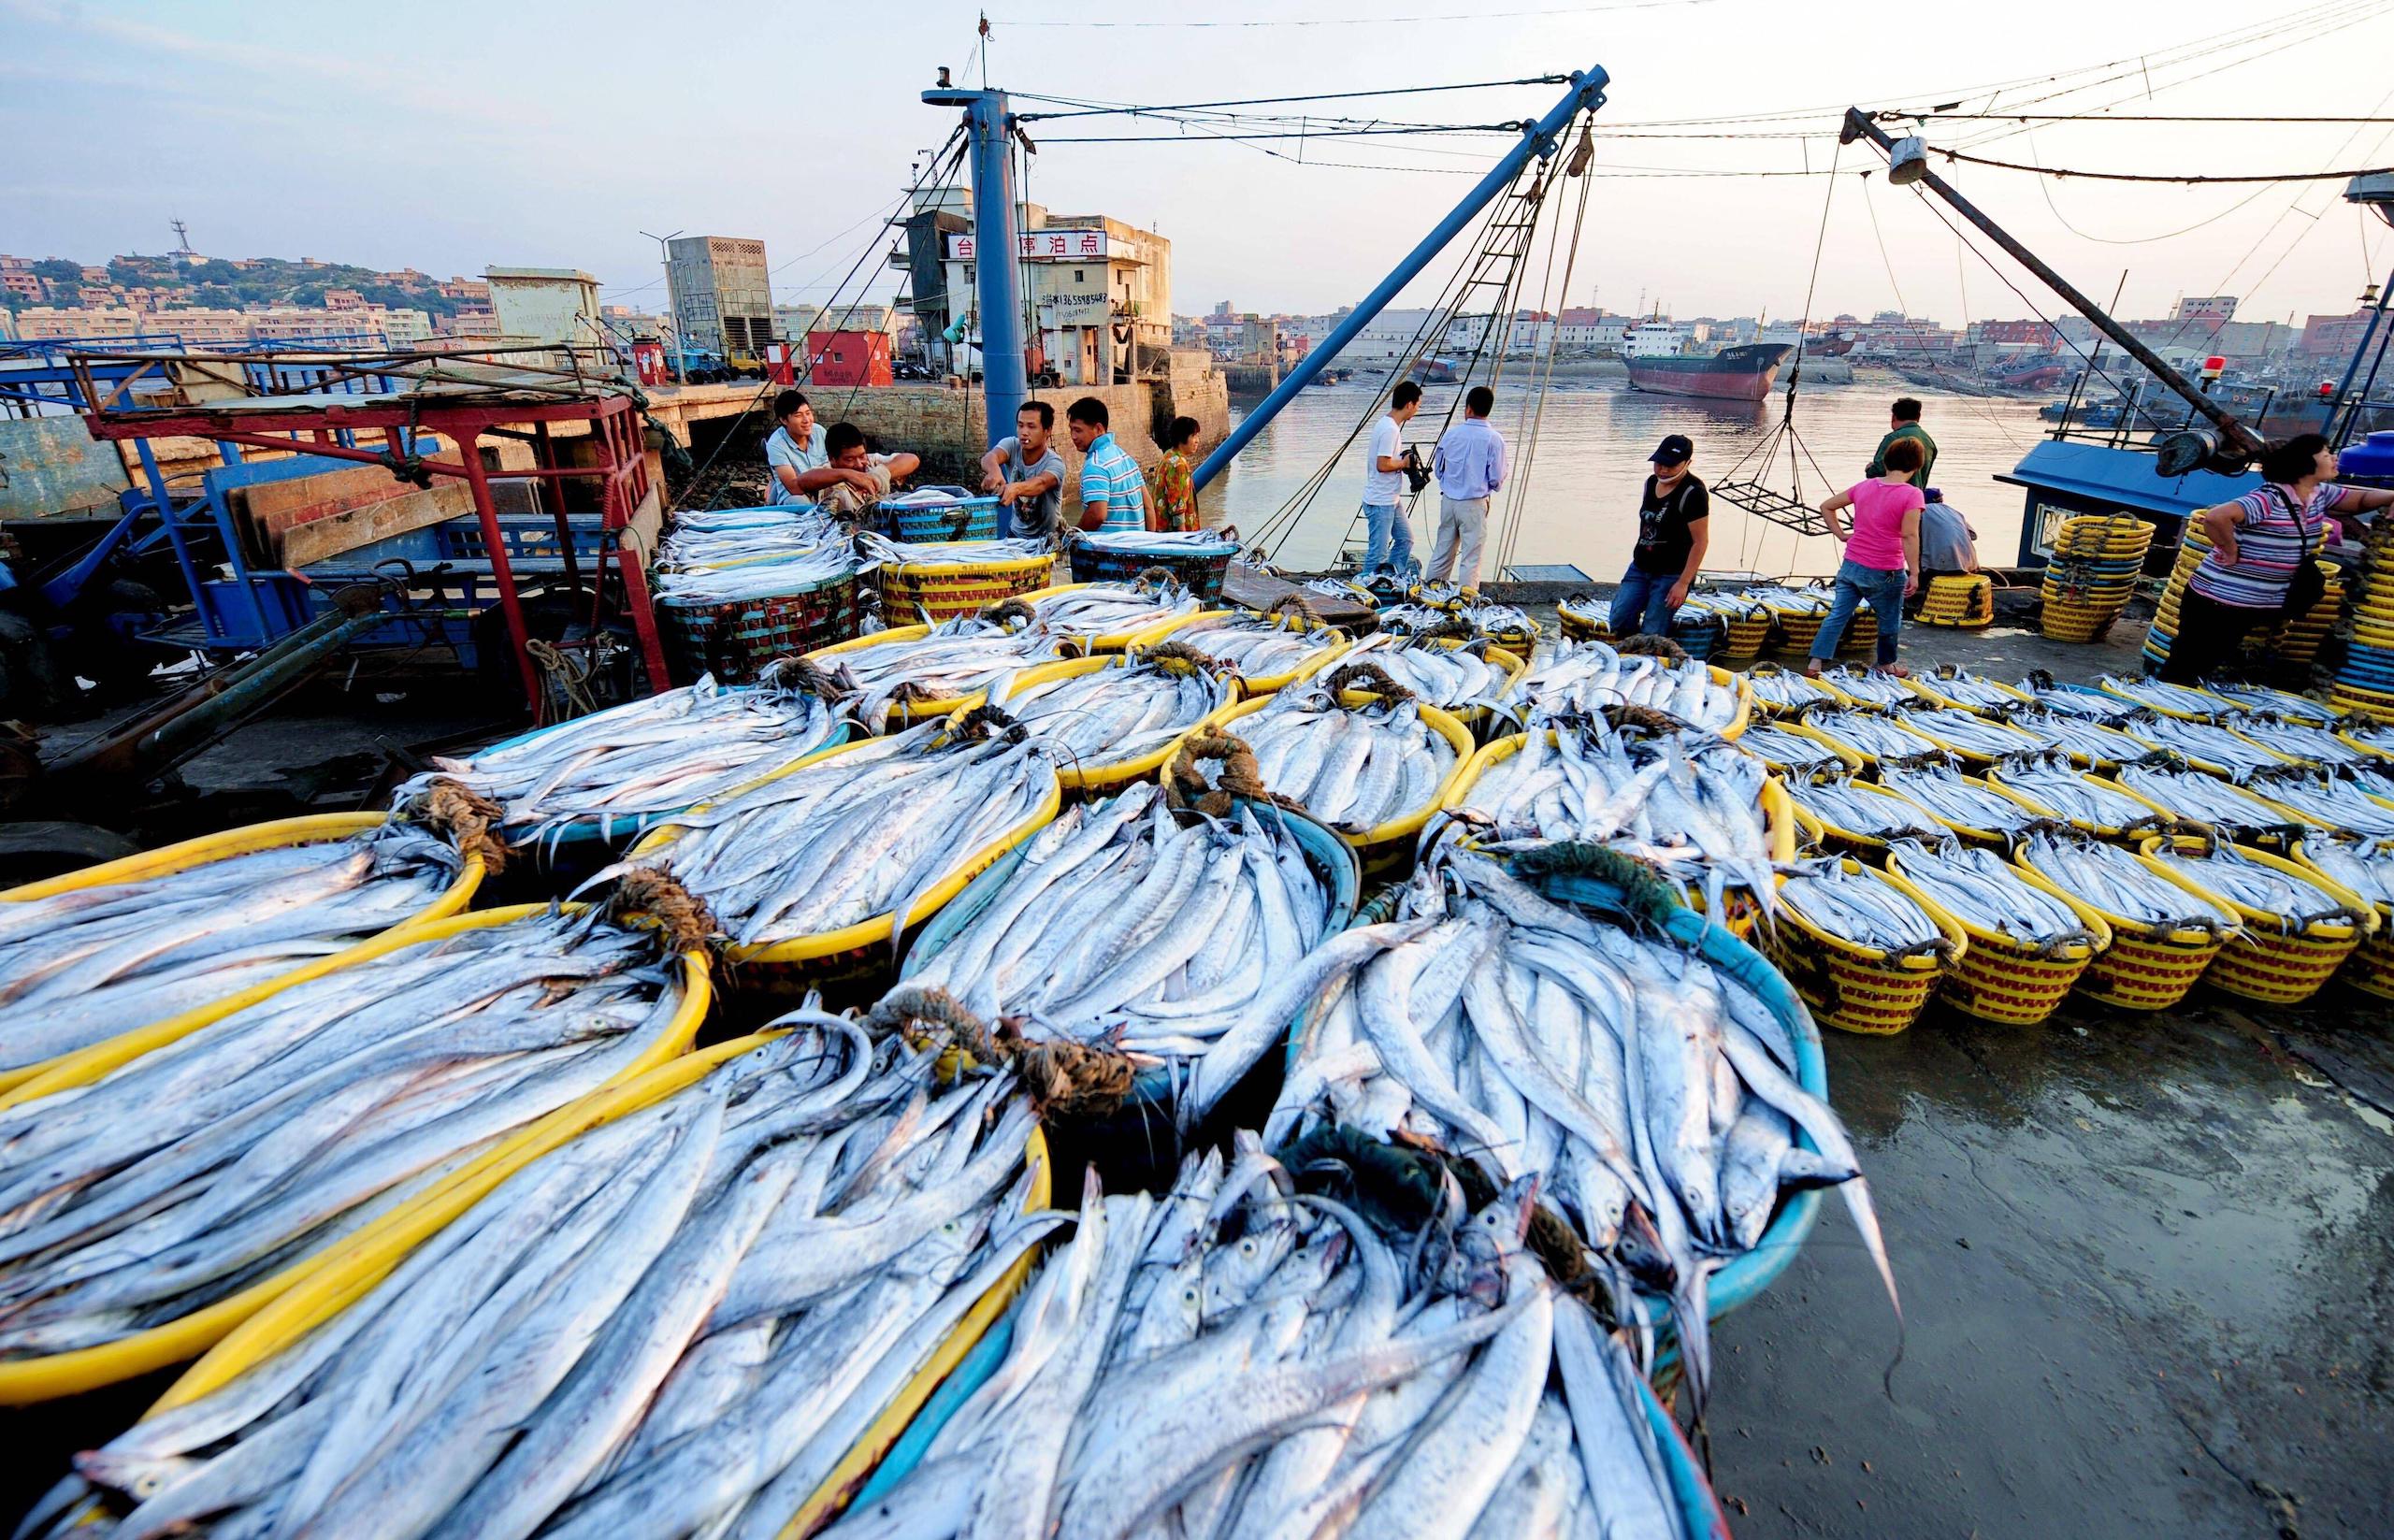 <p>Hairtail landed in Fujian. The impact of climate change on China’s fisheries is alarming scientists, and research gaps need addressing. Professor Tian Yongjun says: “We’re still not certain where the spawning grounds of the ‘big four’ families of fish are,” referring to hairtail, large and small yellow croakers, and cuttlefish. (Image: Zhang Guojun / Alamy)</p>